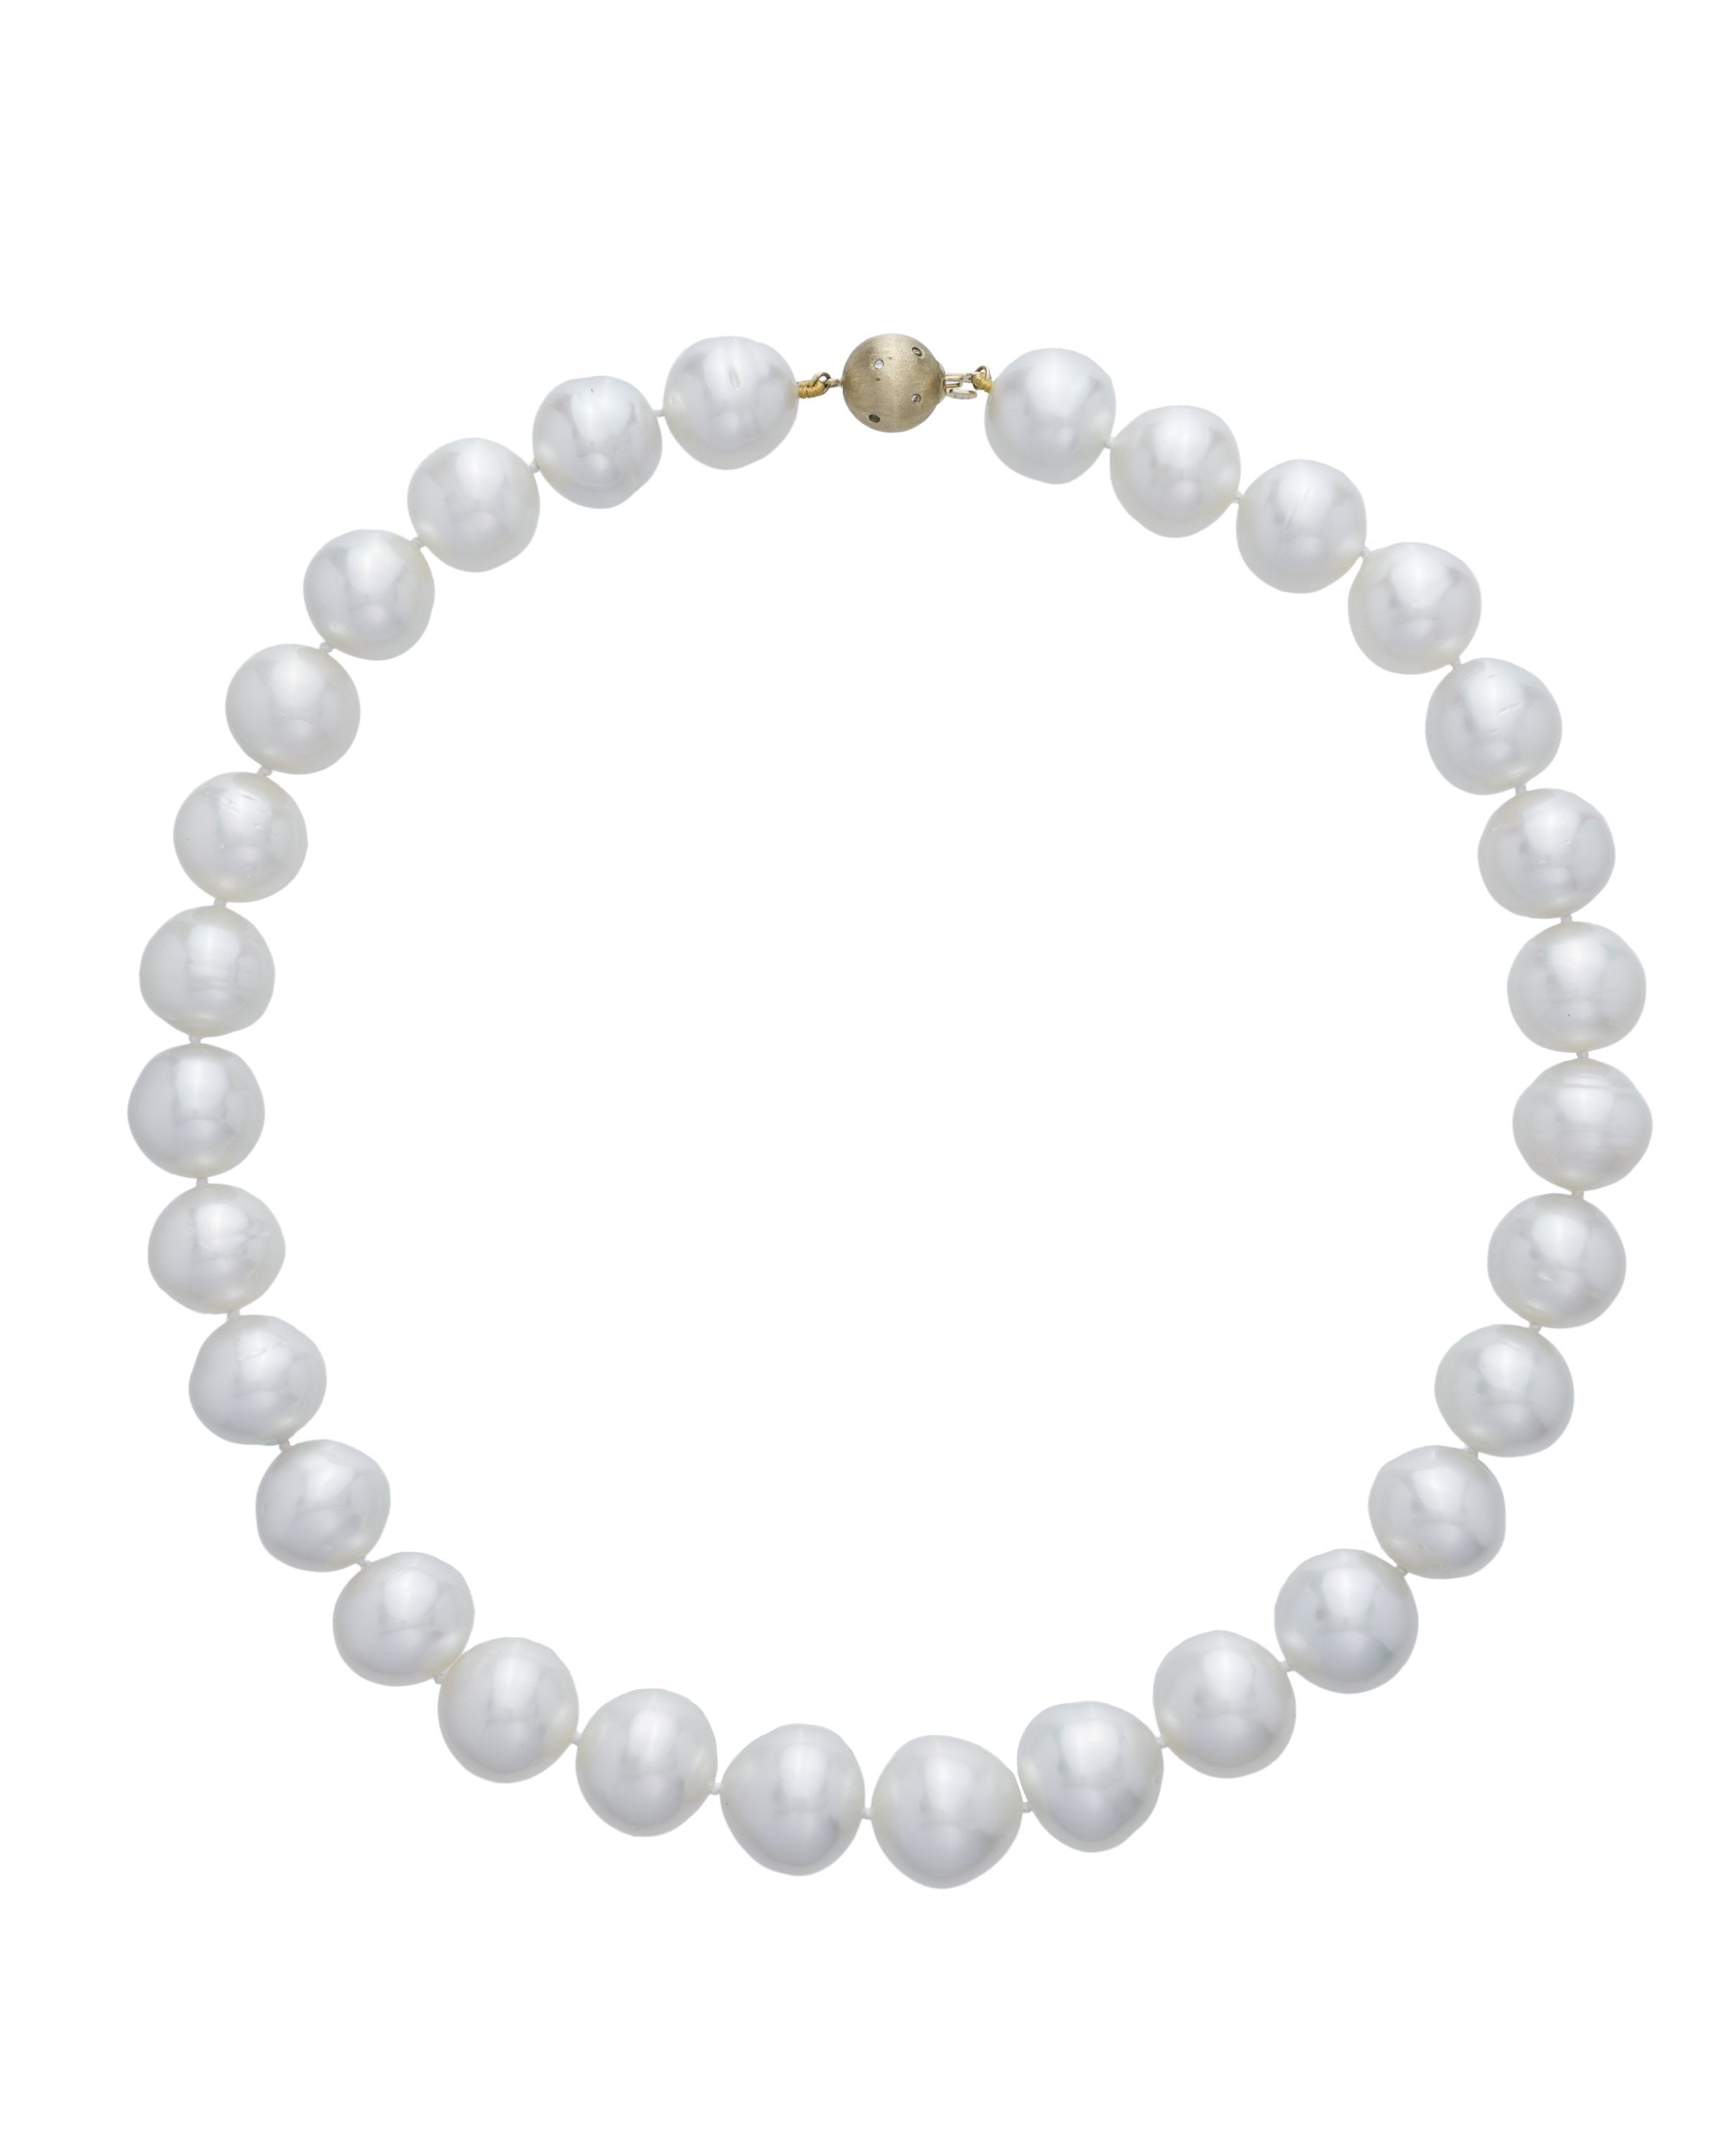 Australian South Sea pearl strand featuring a diamond set clasp, crafted in 18 karat yellow gold.